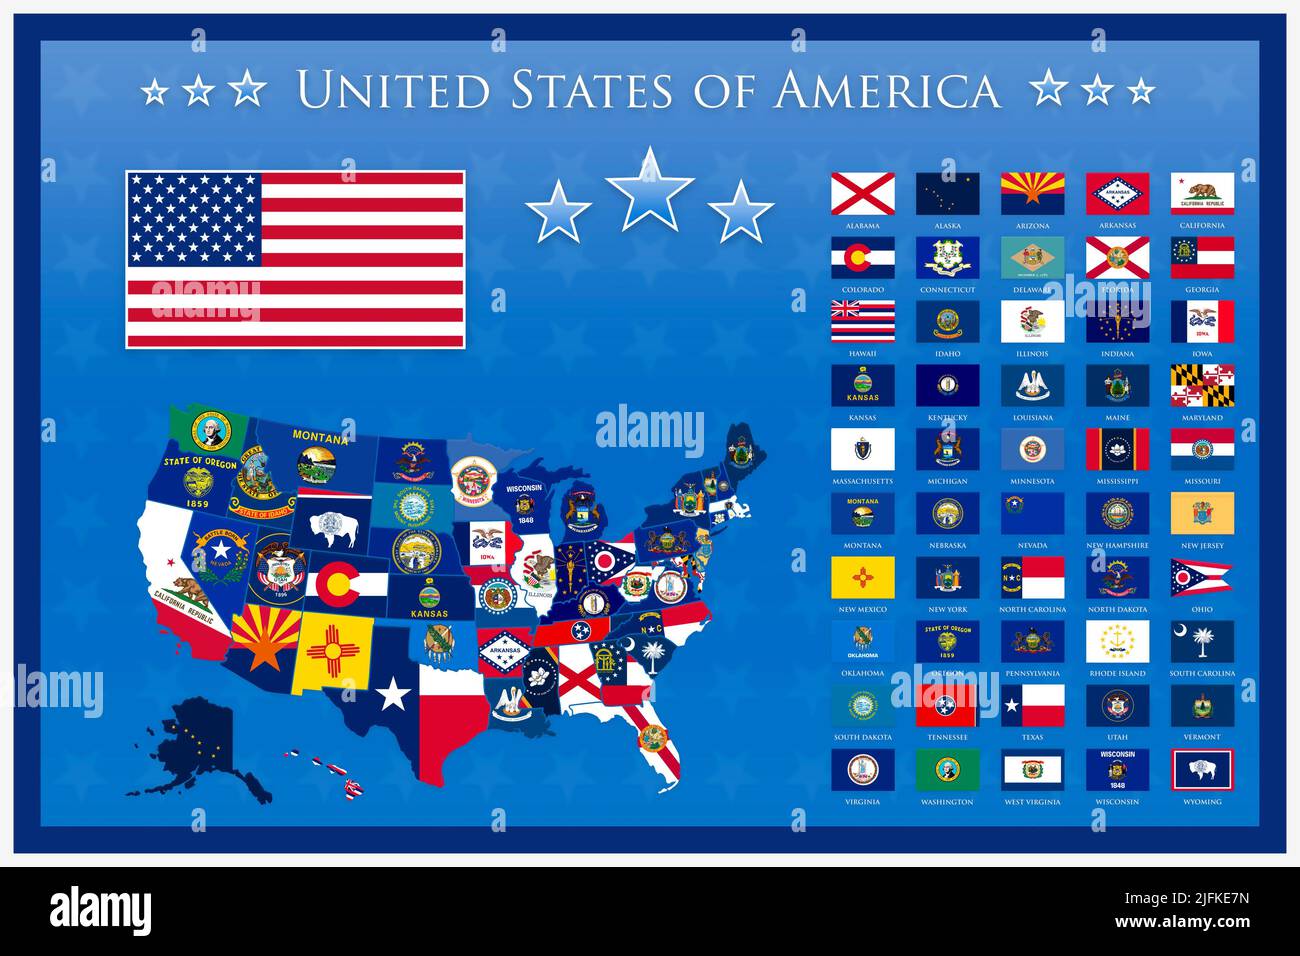 United States of America Map and Federal state flags poster illustration. Stock Photo